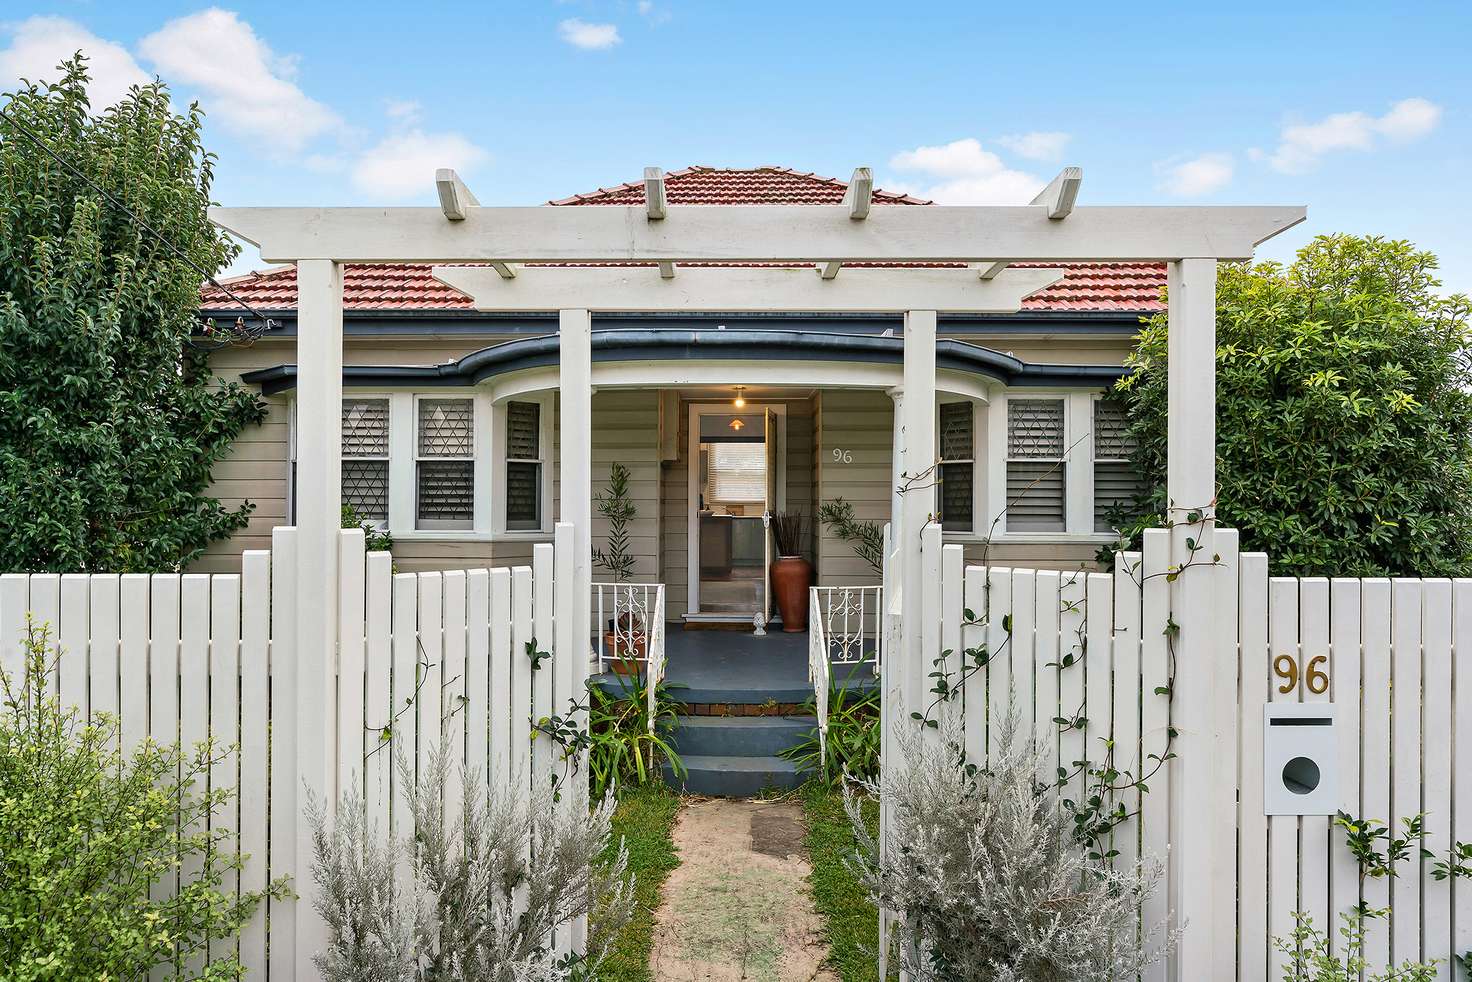 Main view of Homely house listing, 96 Howe Street, Lambton NSW 2299